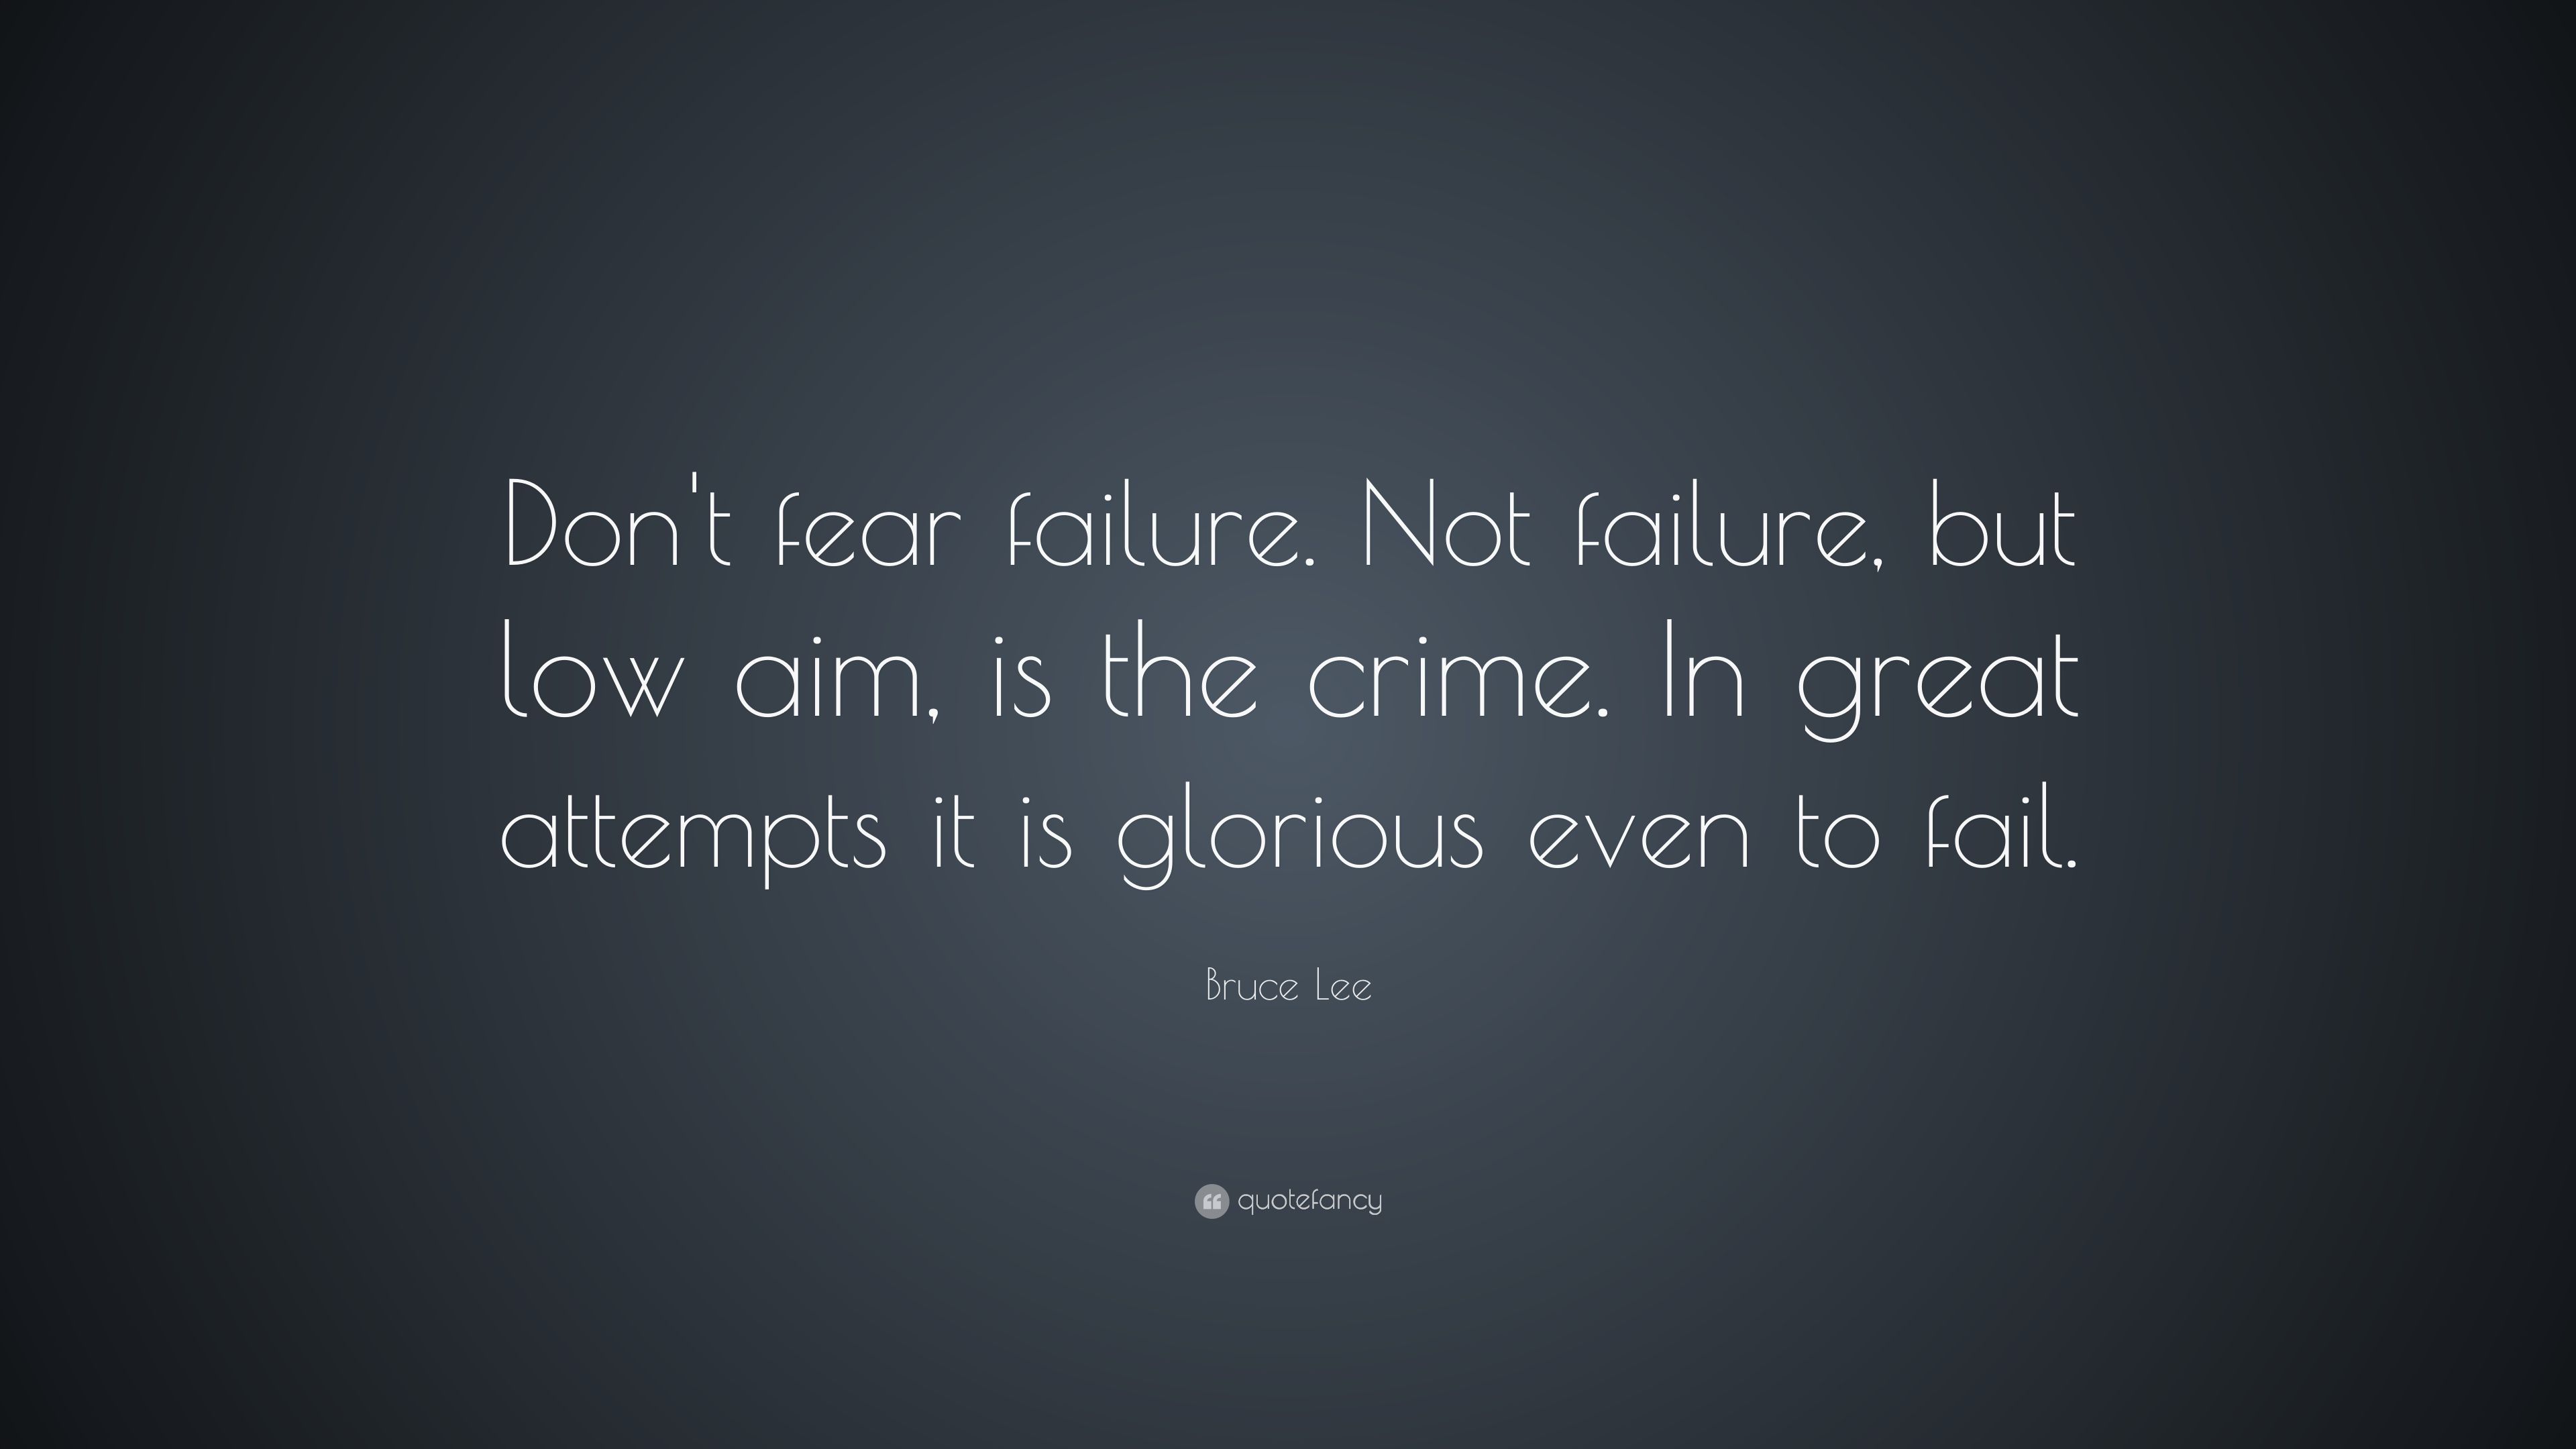 Bruce Lee Quote Dont fear failure. Not failure, but low aim, is